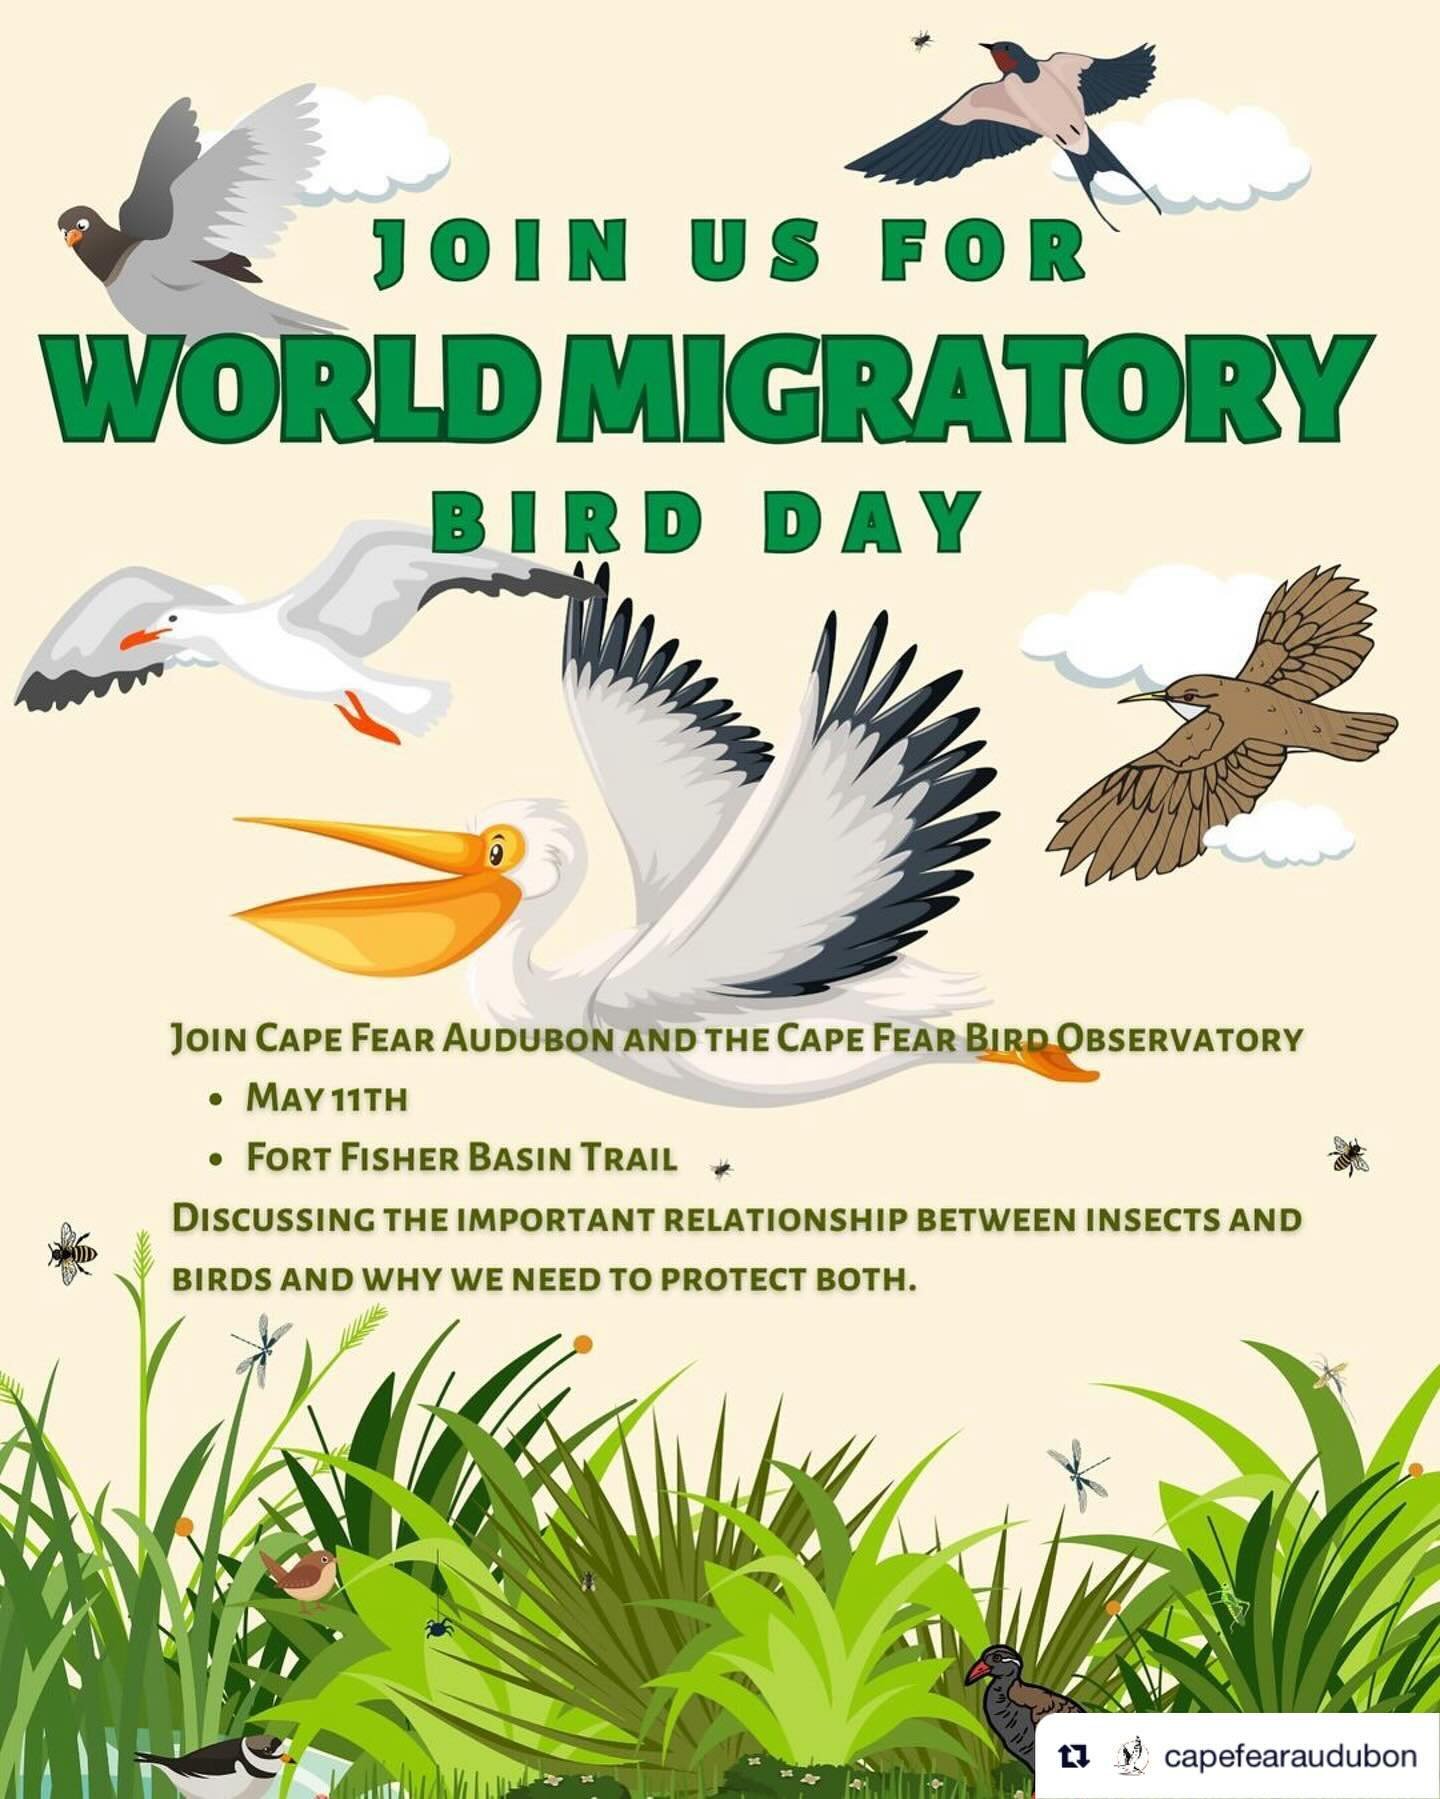 Repost from @capefearaudubon
&bull;
We hope you will join us on May 11th at 8am to celebrate World Migratory Bird Day! The outing is co-led by Cape Fear Bird Observatory, so you don&rsquo;t want to miss it! Register now at our link in bio.